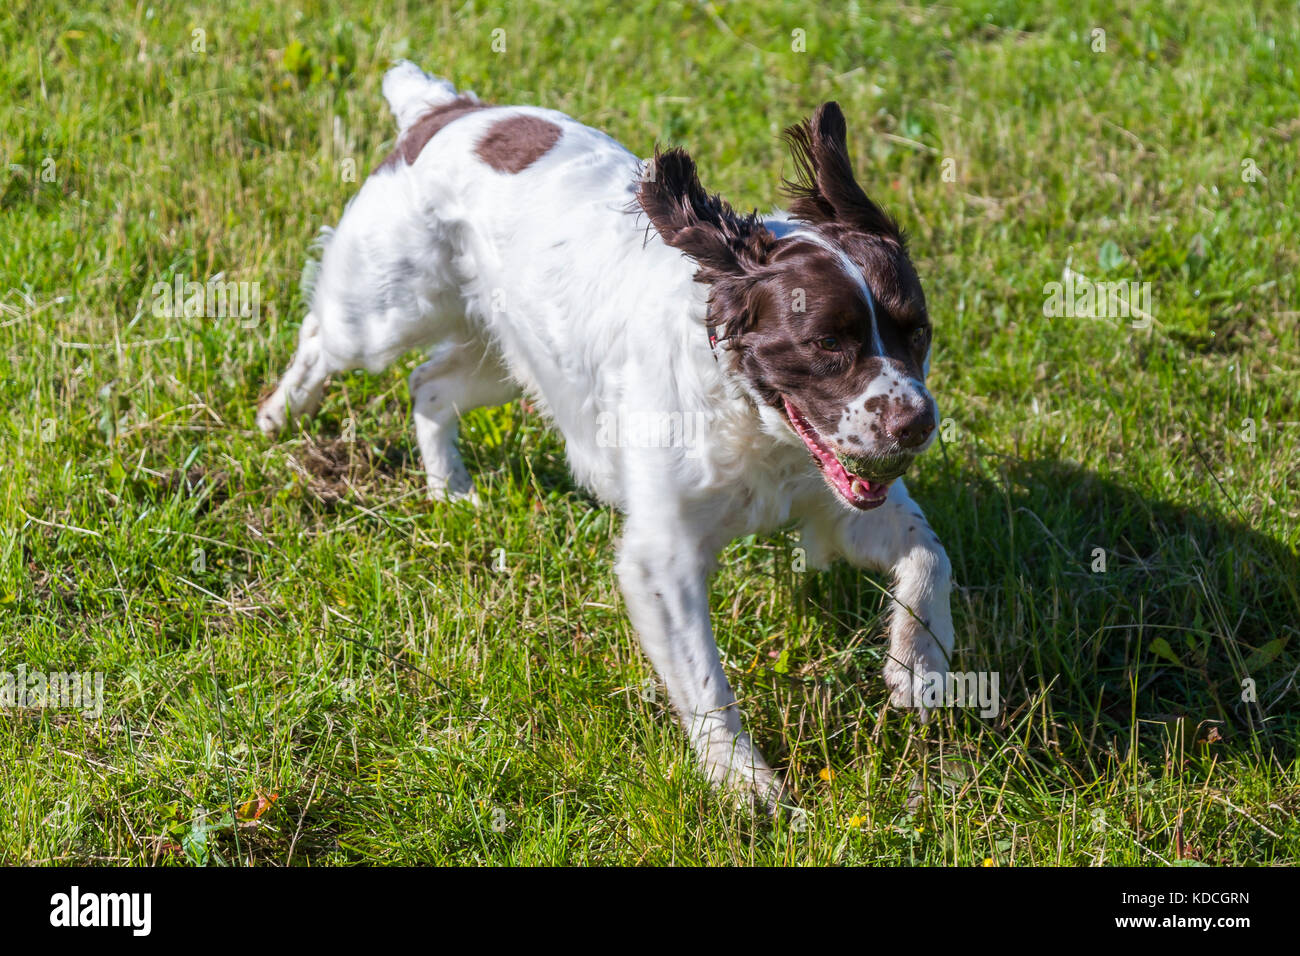 English springer spaniel running over grass with tennis ball in mouth Stock Photo